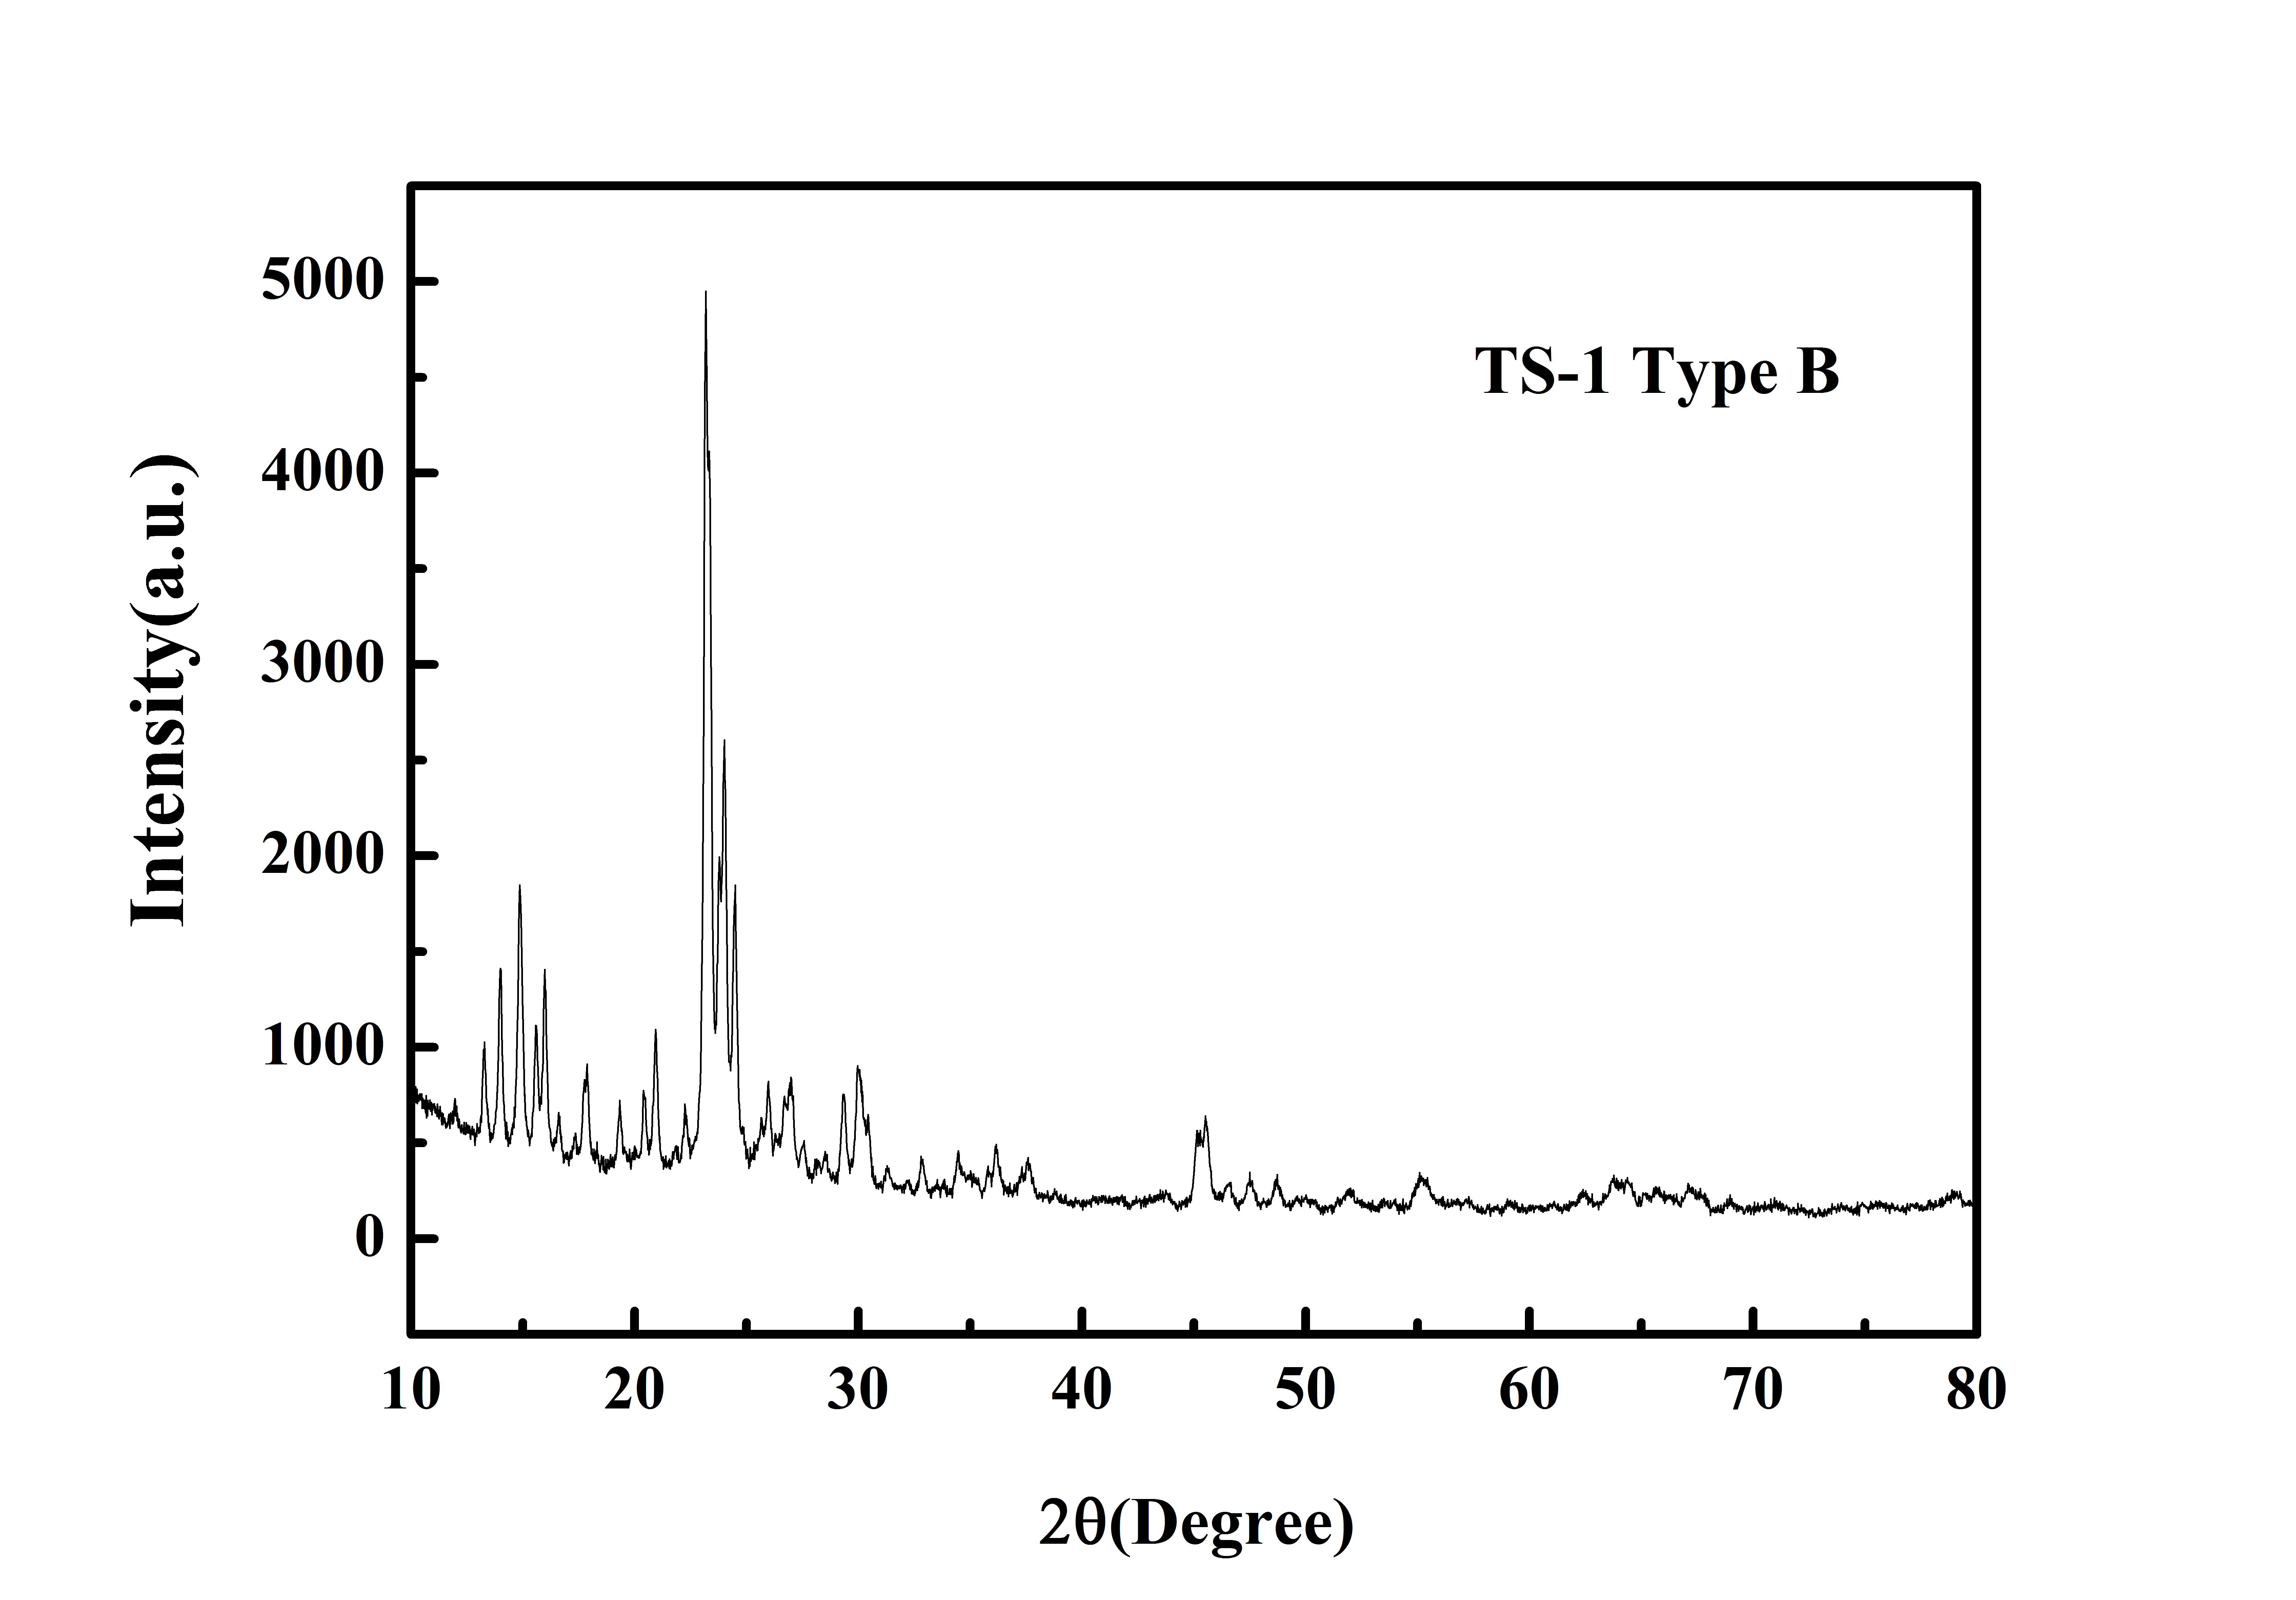 Typical XRD Analysis of ACS Material TS-1 (Type B)